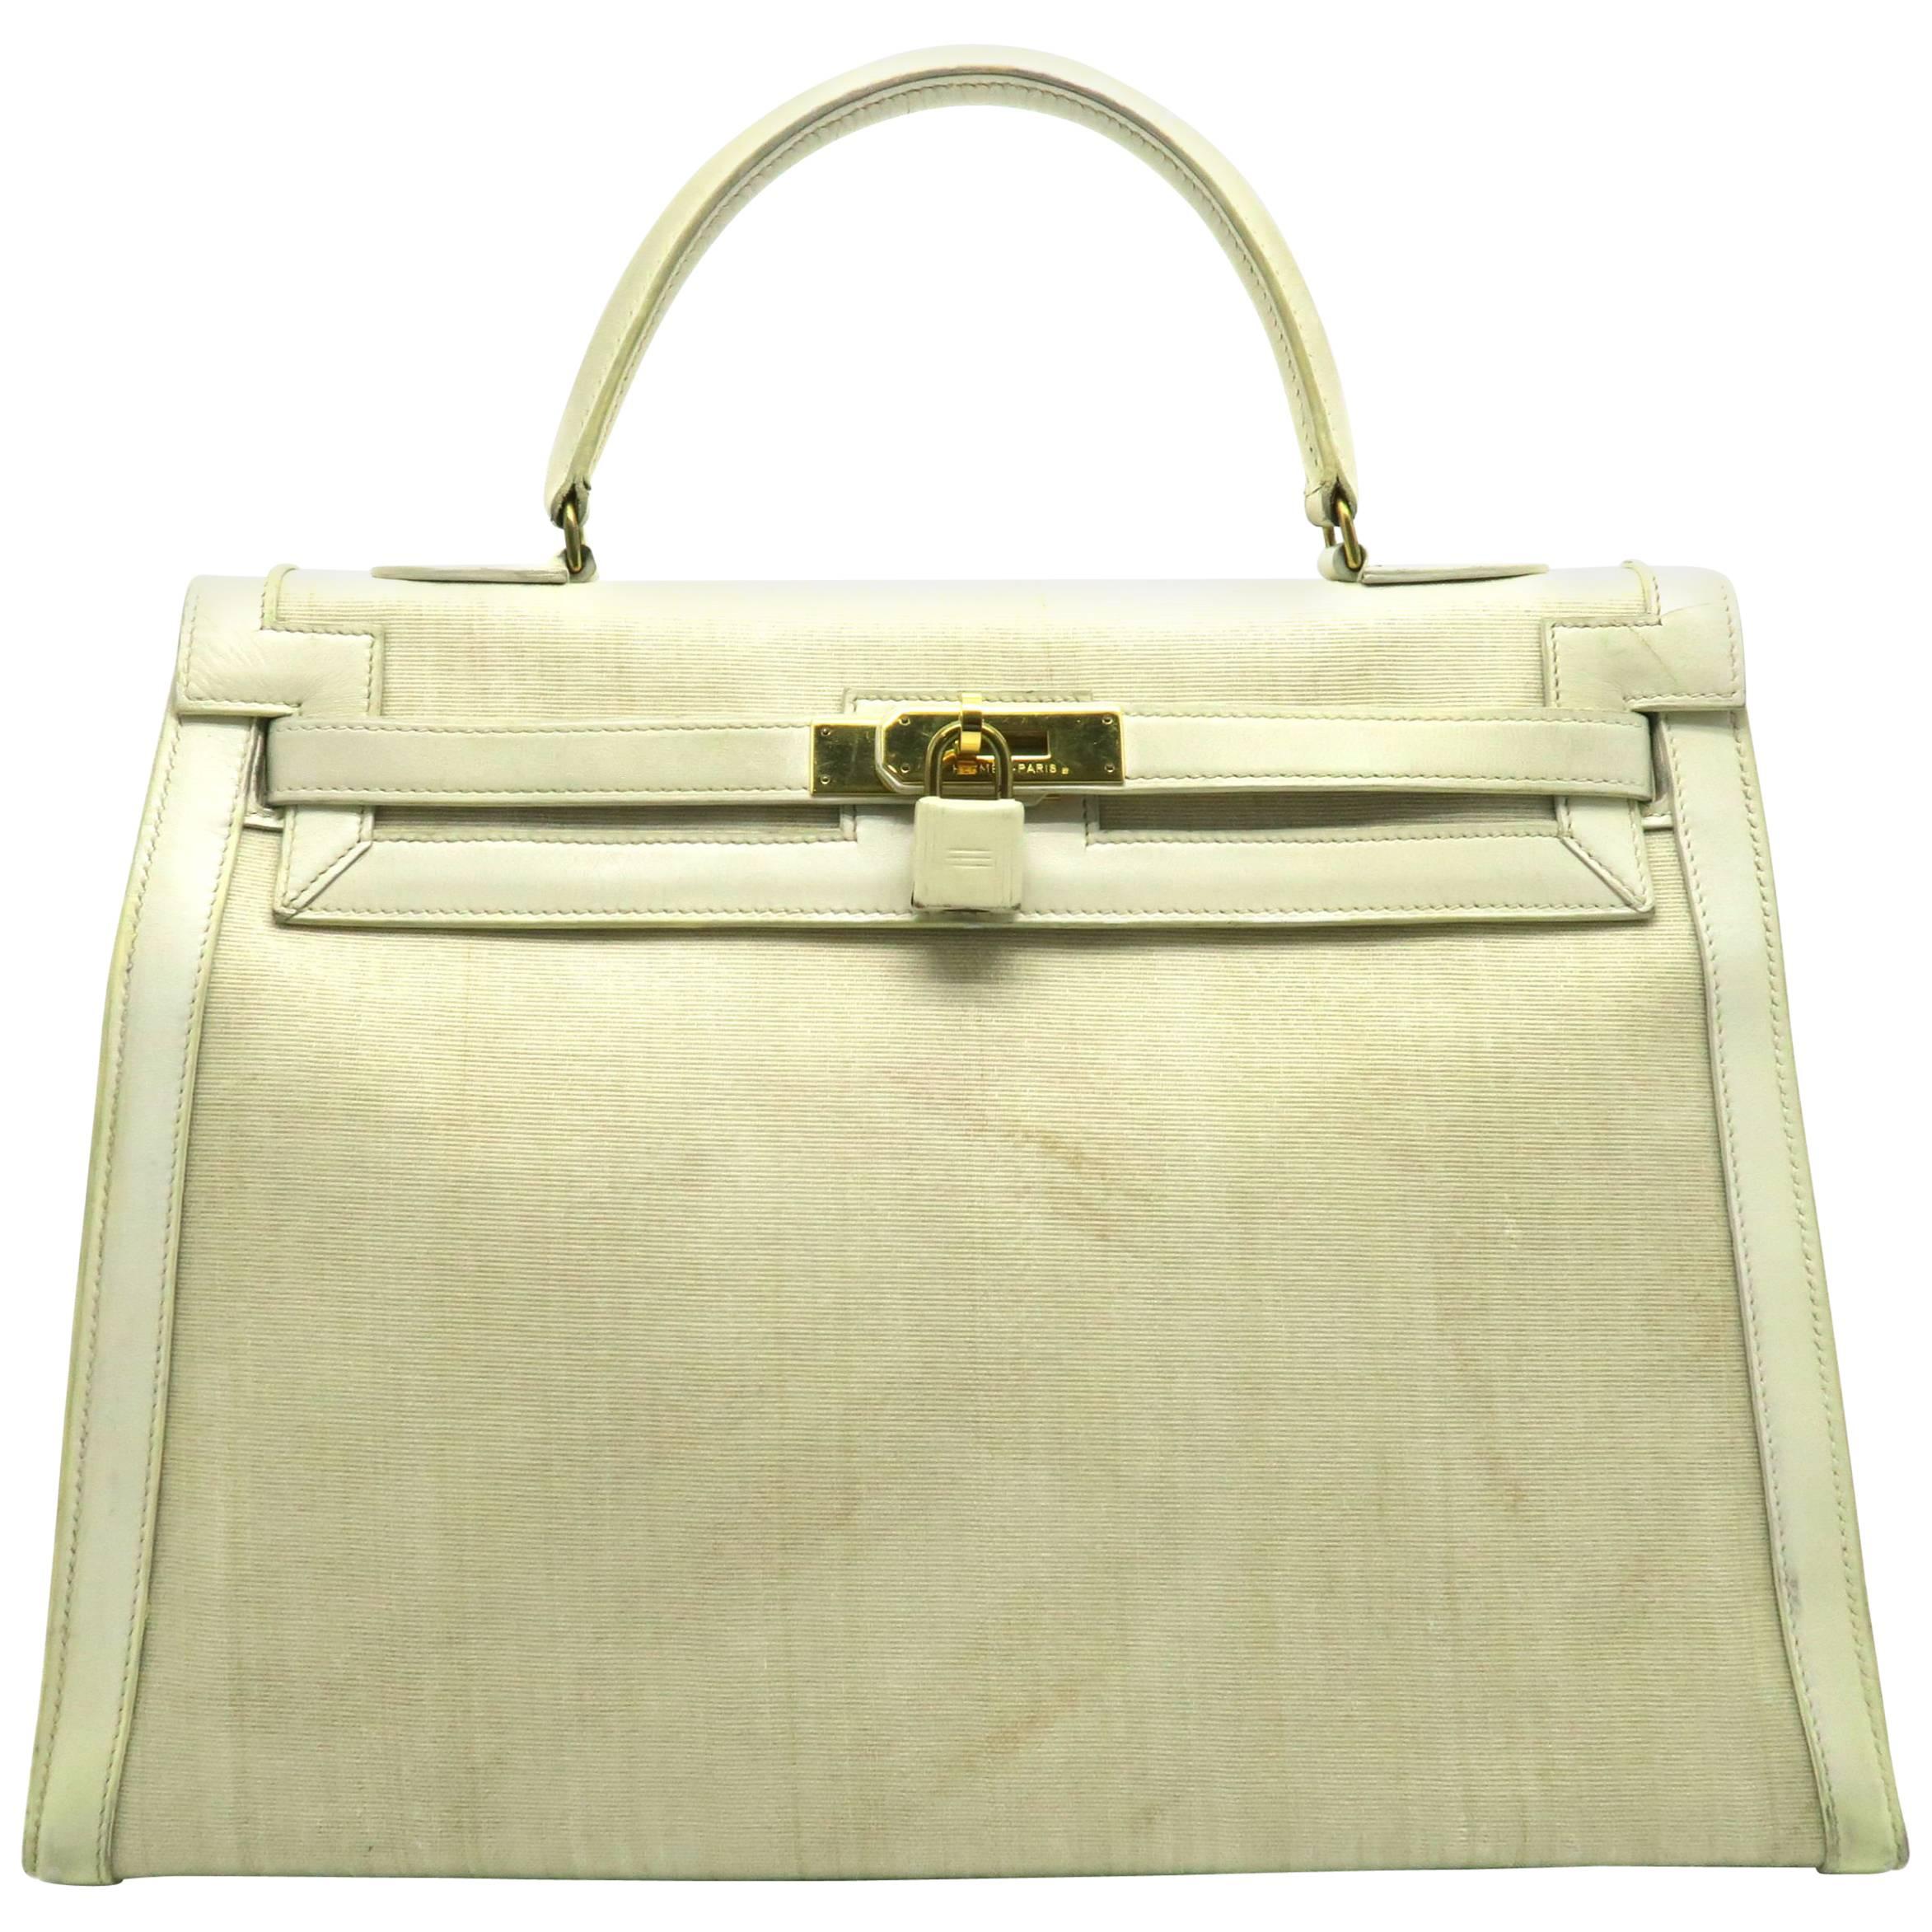 Hermes Kelly 35 Jaune Poussin Beige Box Calf Leather and Canvas Top Handle Bag For Sale